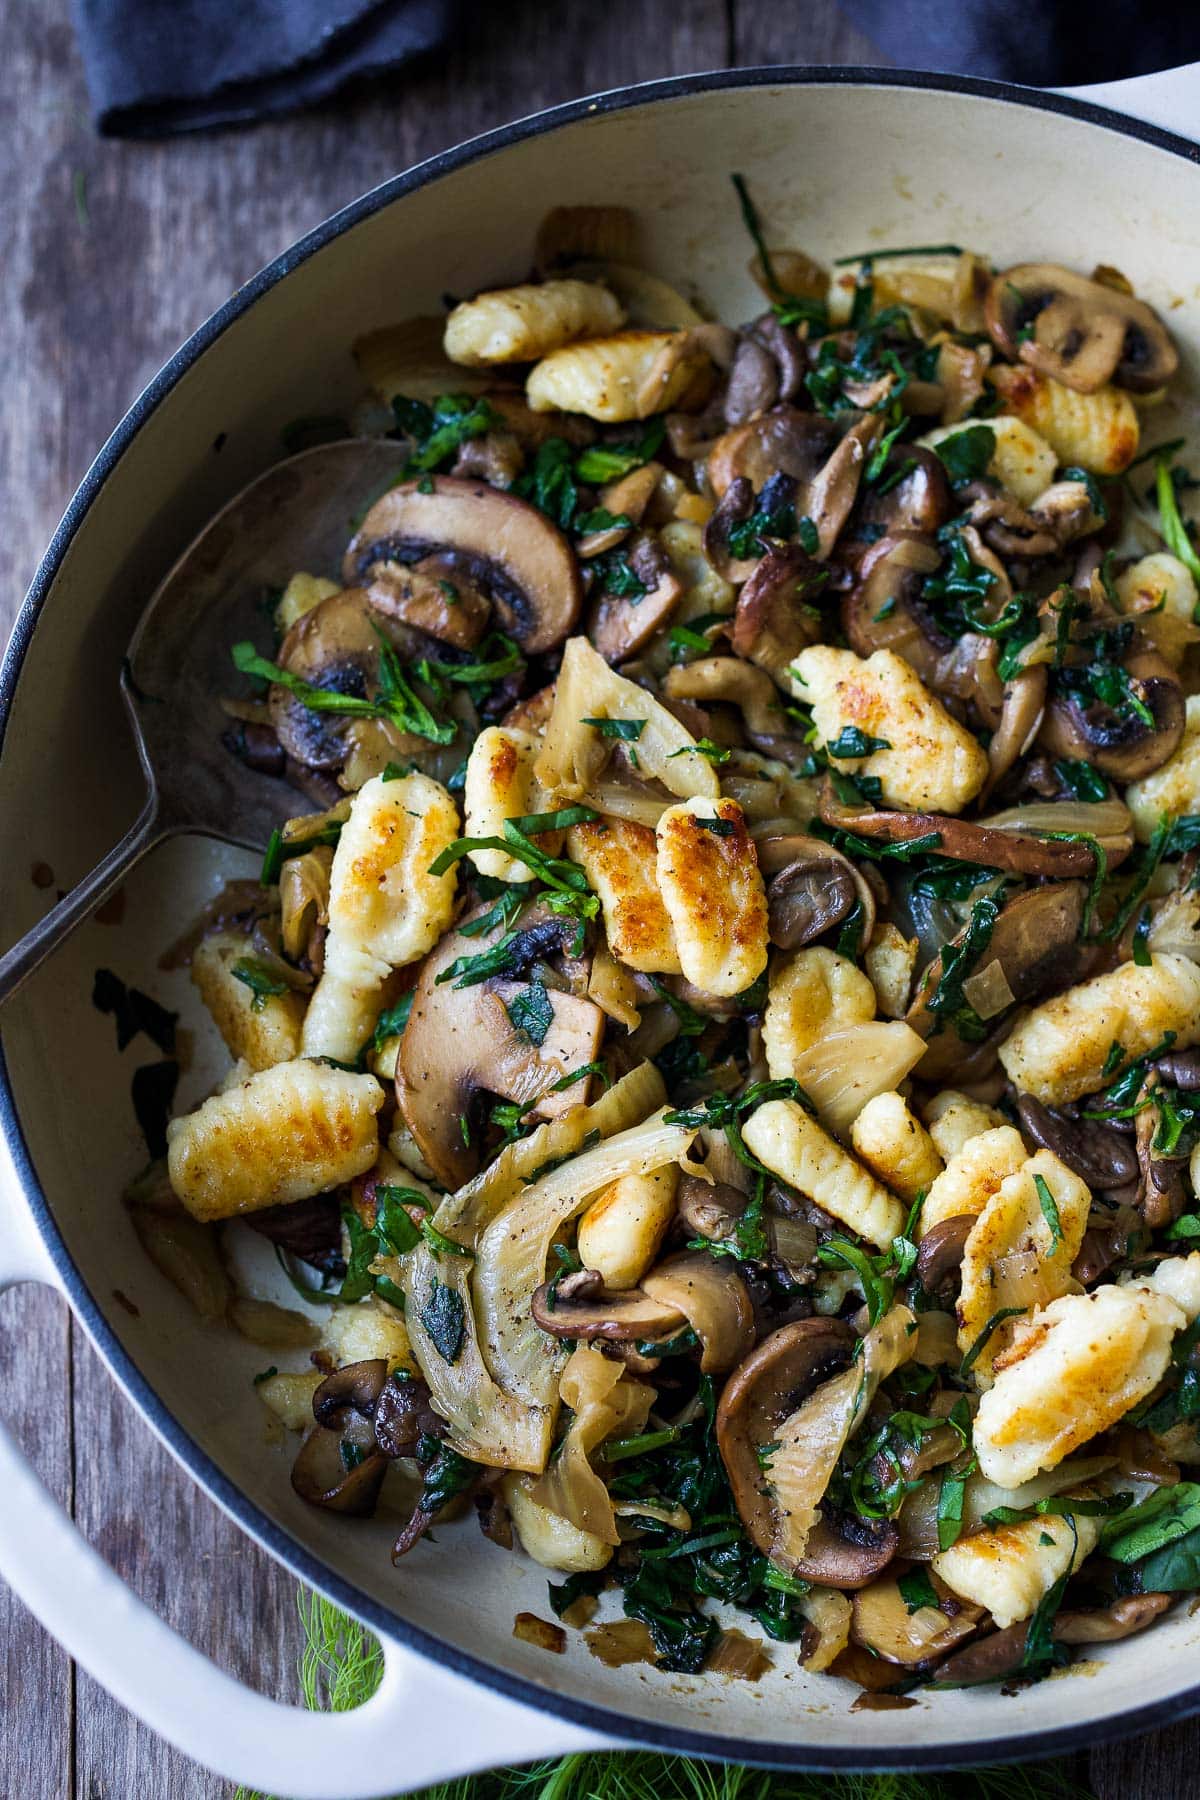 Caramelized fennel, sautéed mushrooms and wilted spinach combine perfectly with pan-seared potato gnocchi, a quick vegetarian dinner!